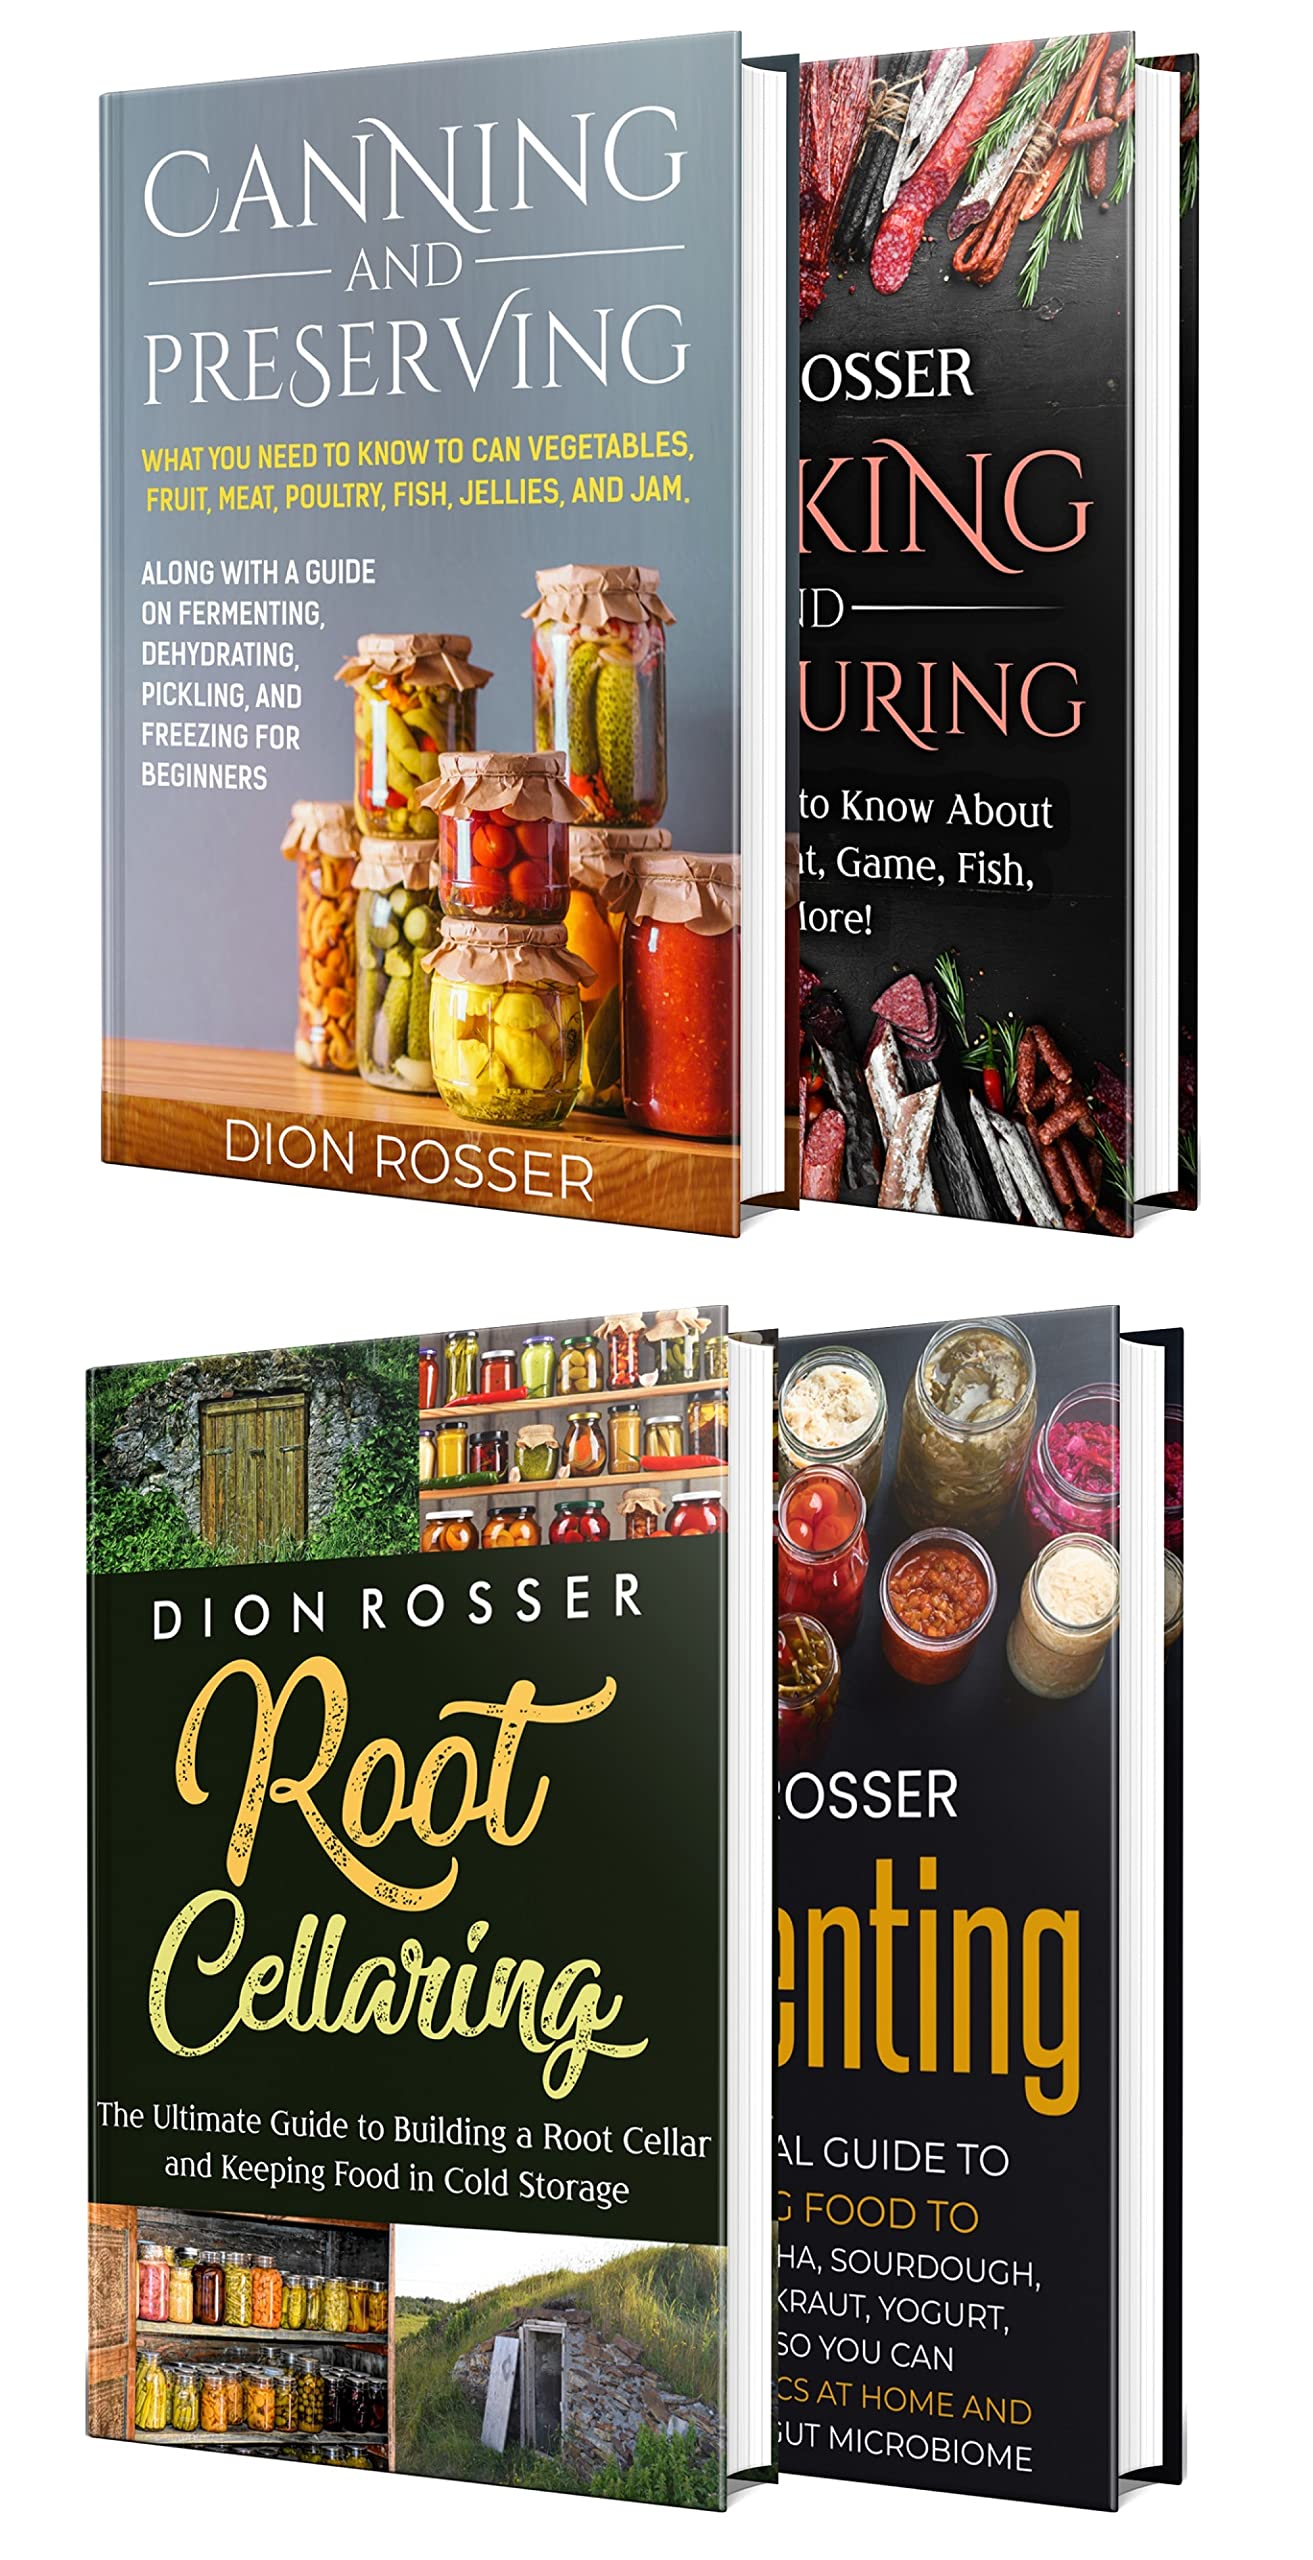 Preserving Food: An Essential Guide to Canning, Preserving, Smoking, Salt Curing, Root Cellaring, and Fermenting (Self-sustaining)